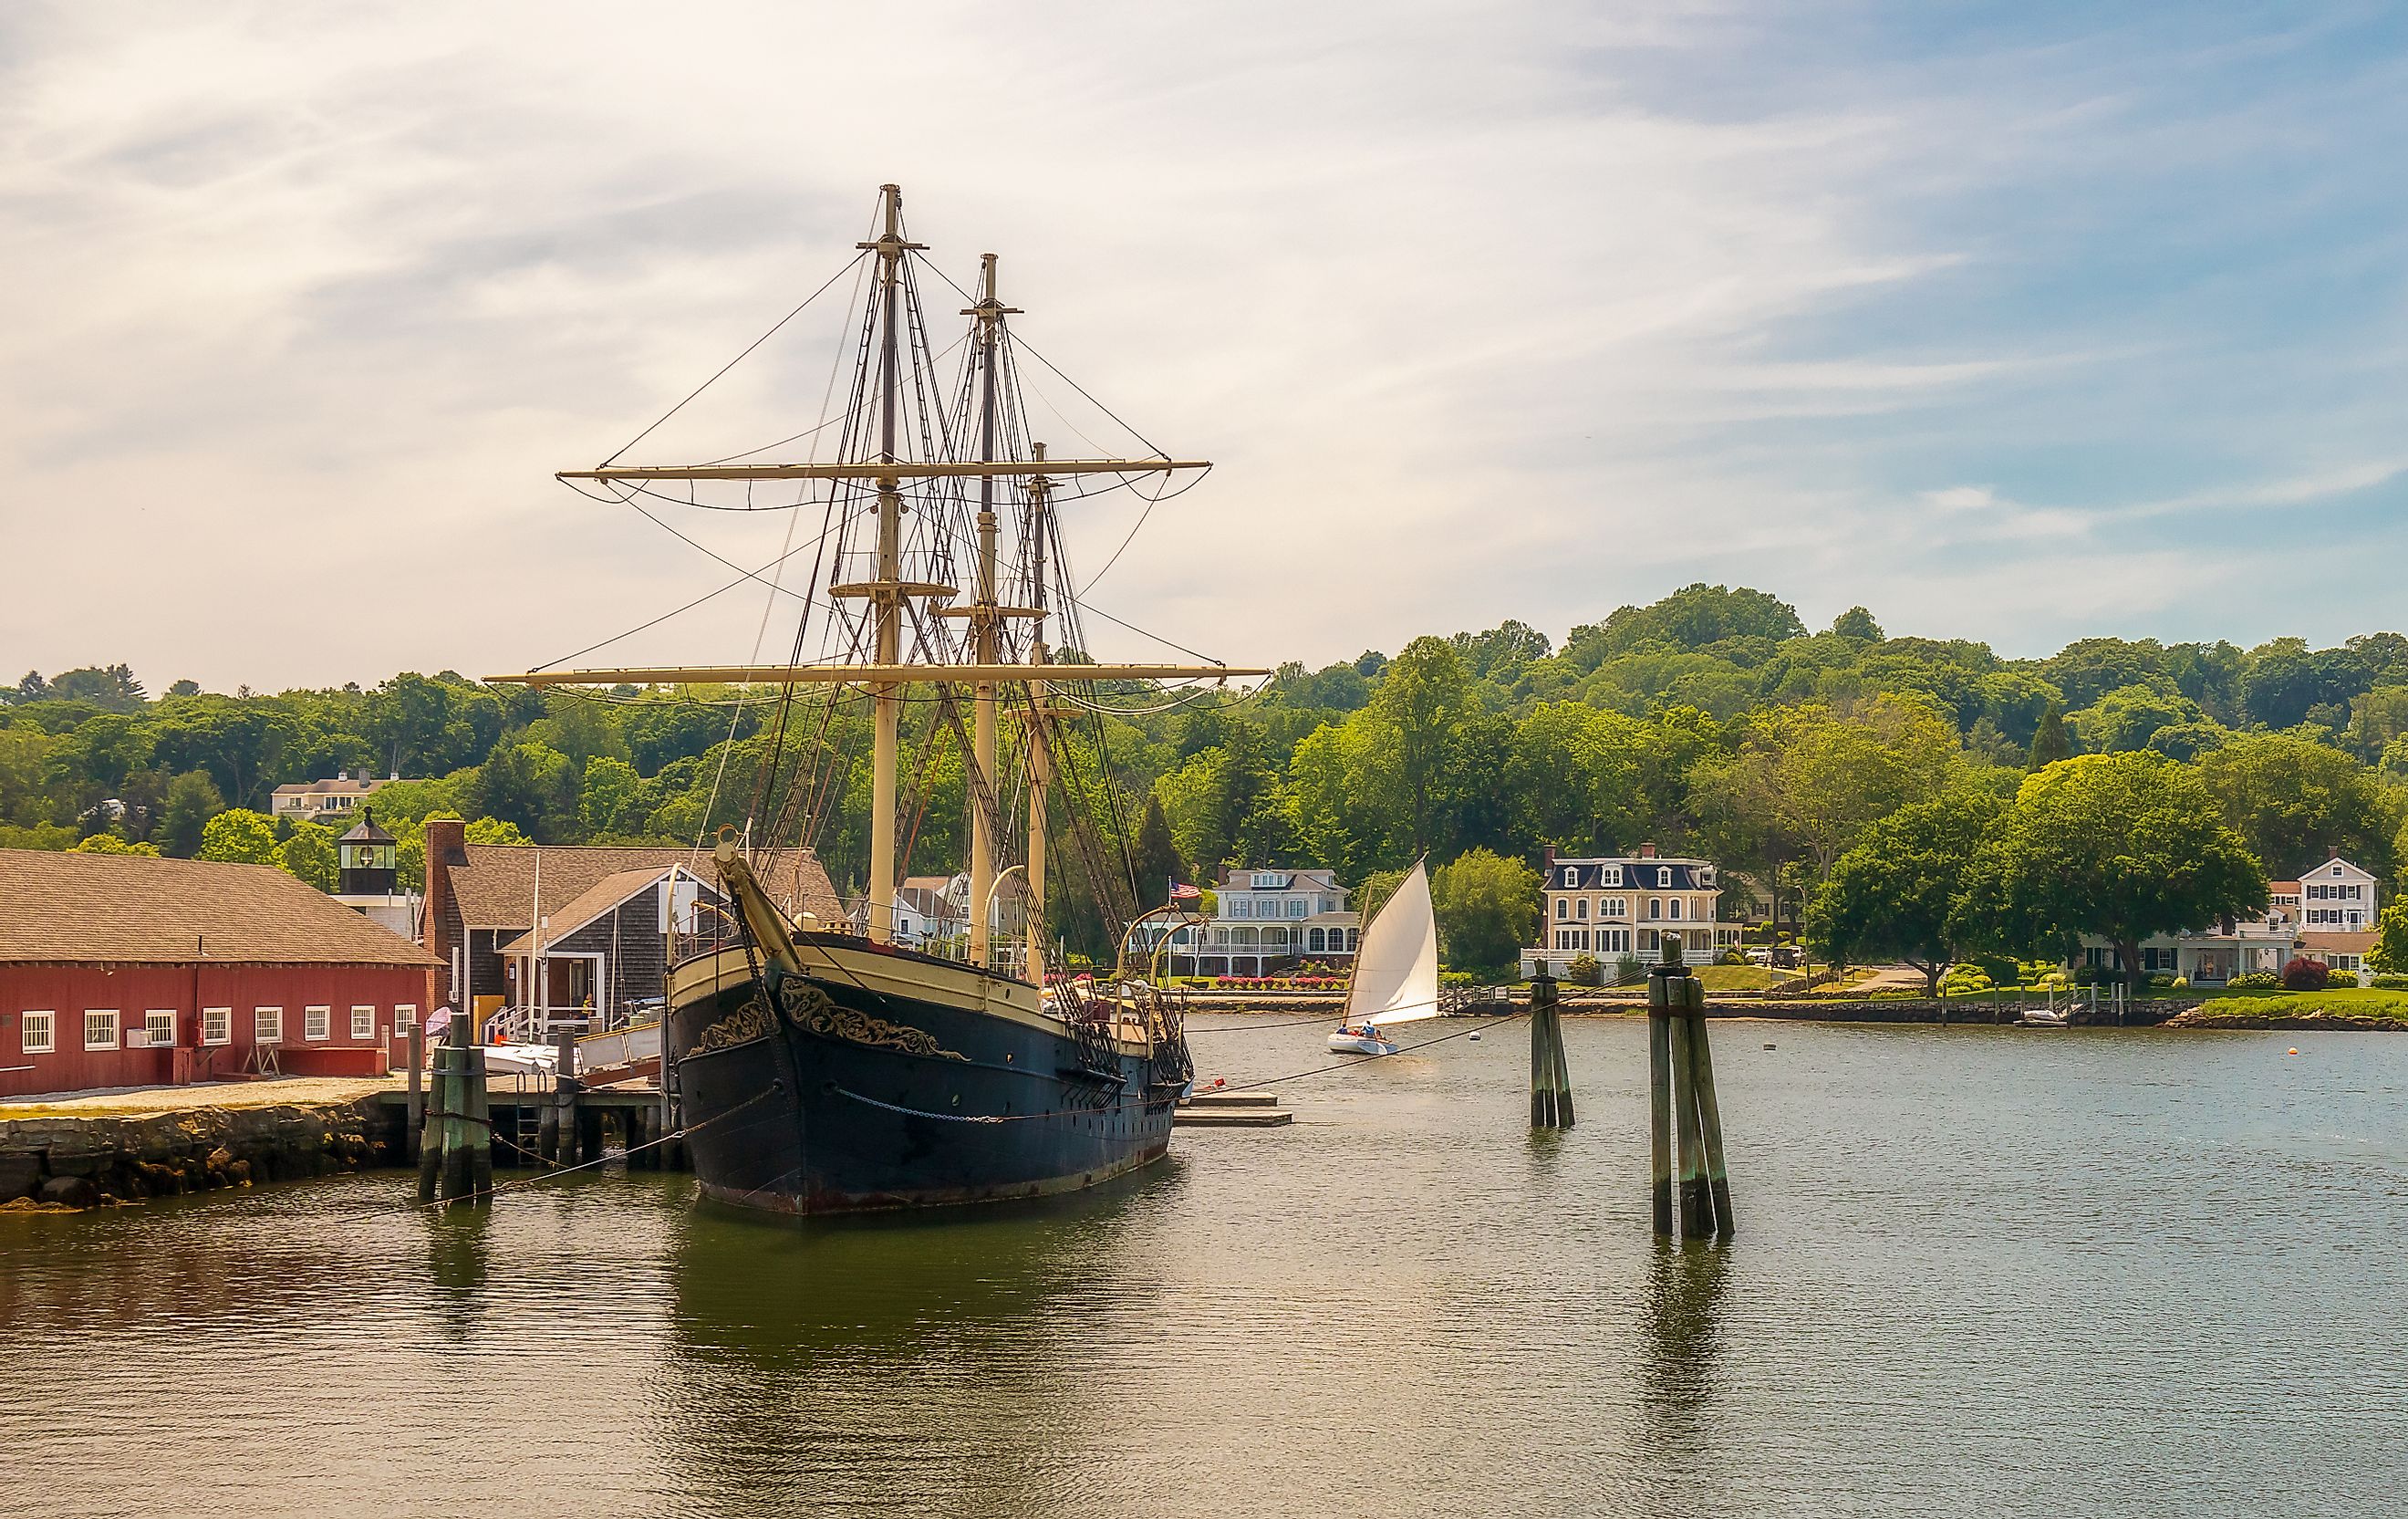 Mystic, Connecticut - June 20, 2020: Mystic Seaport, outdoor recreated 19th century village and educational maritime museum in Mystic, Connecticut. Wooden vessel docks. Editorial credit: Faina Gurevich / Shutterstock.com